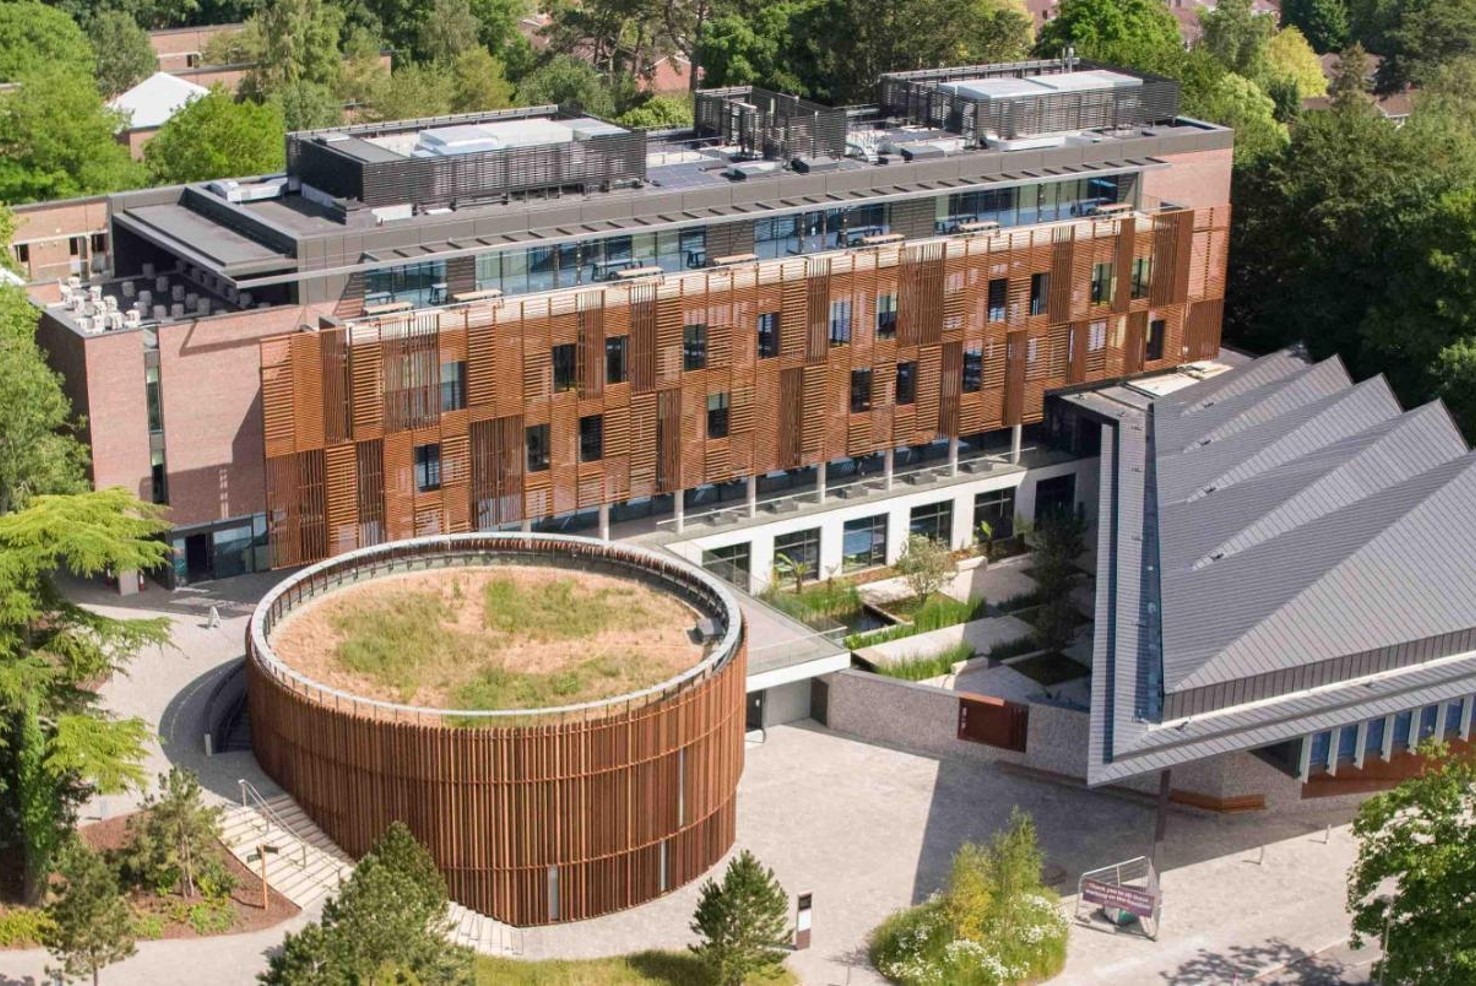 WEST DOWNS CENTRE: New Building for University of Winchester